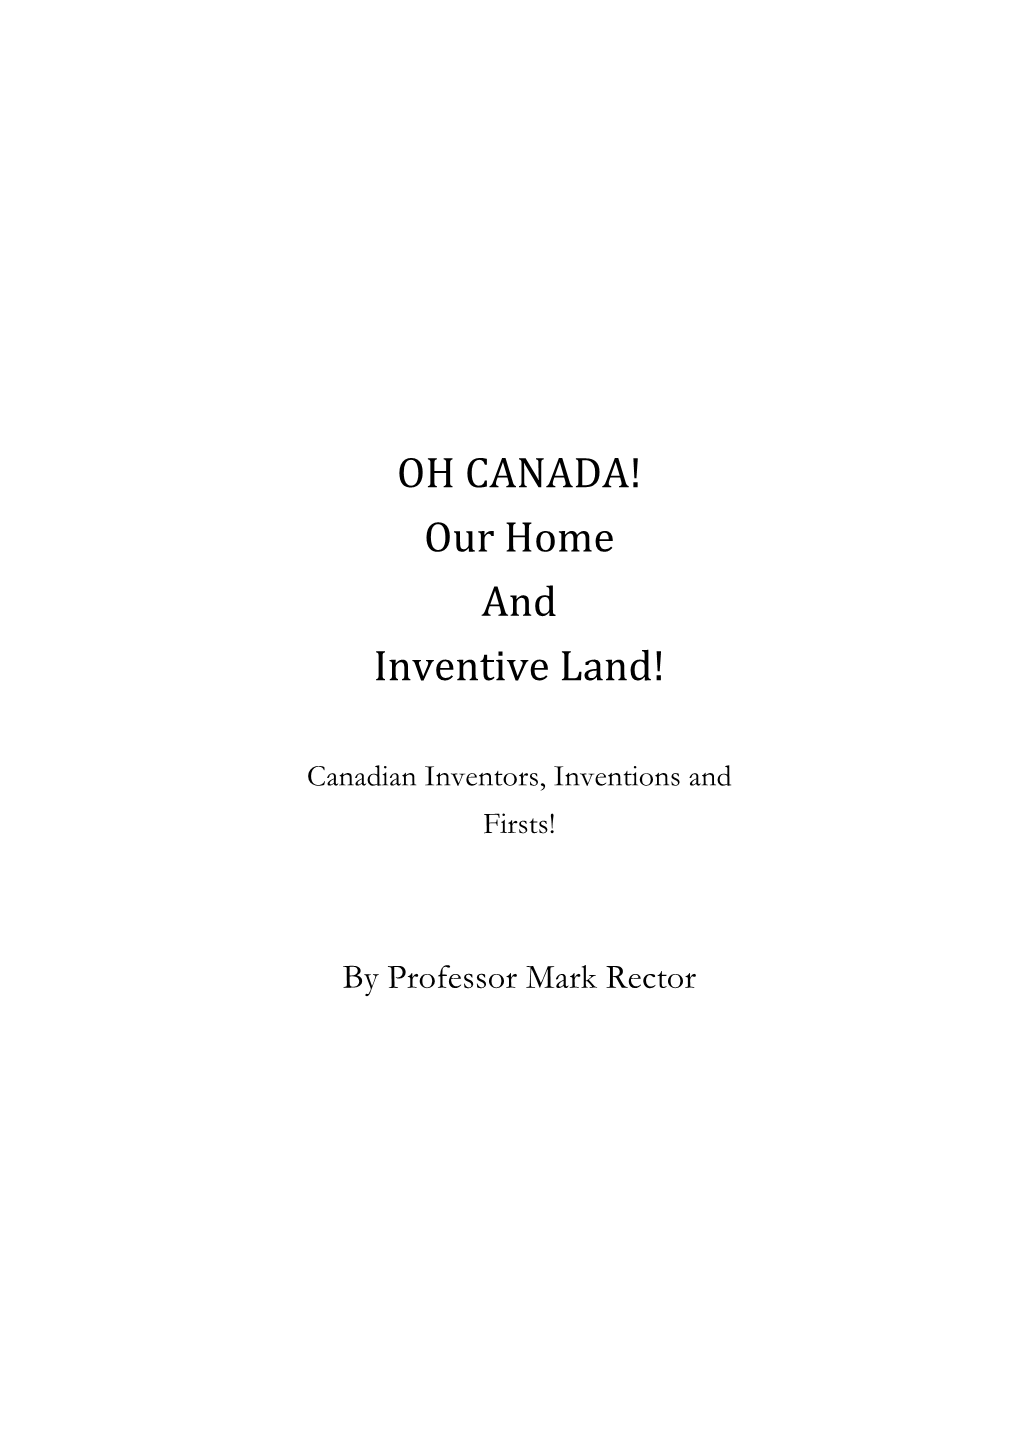 OH CANADA! Our Home and Inventive Land!